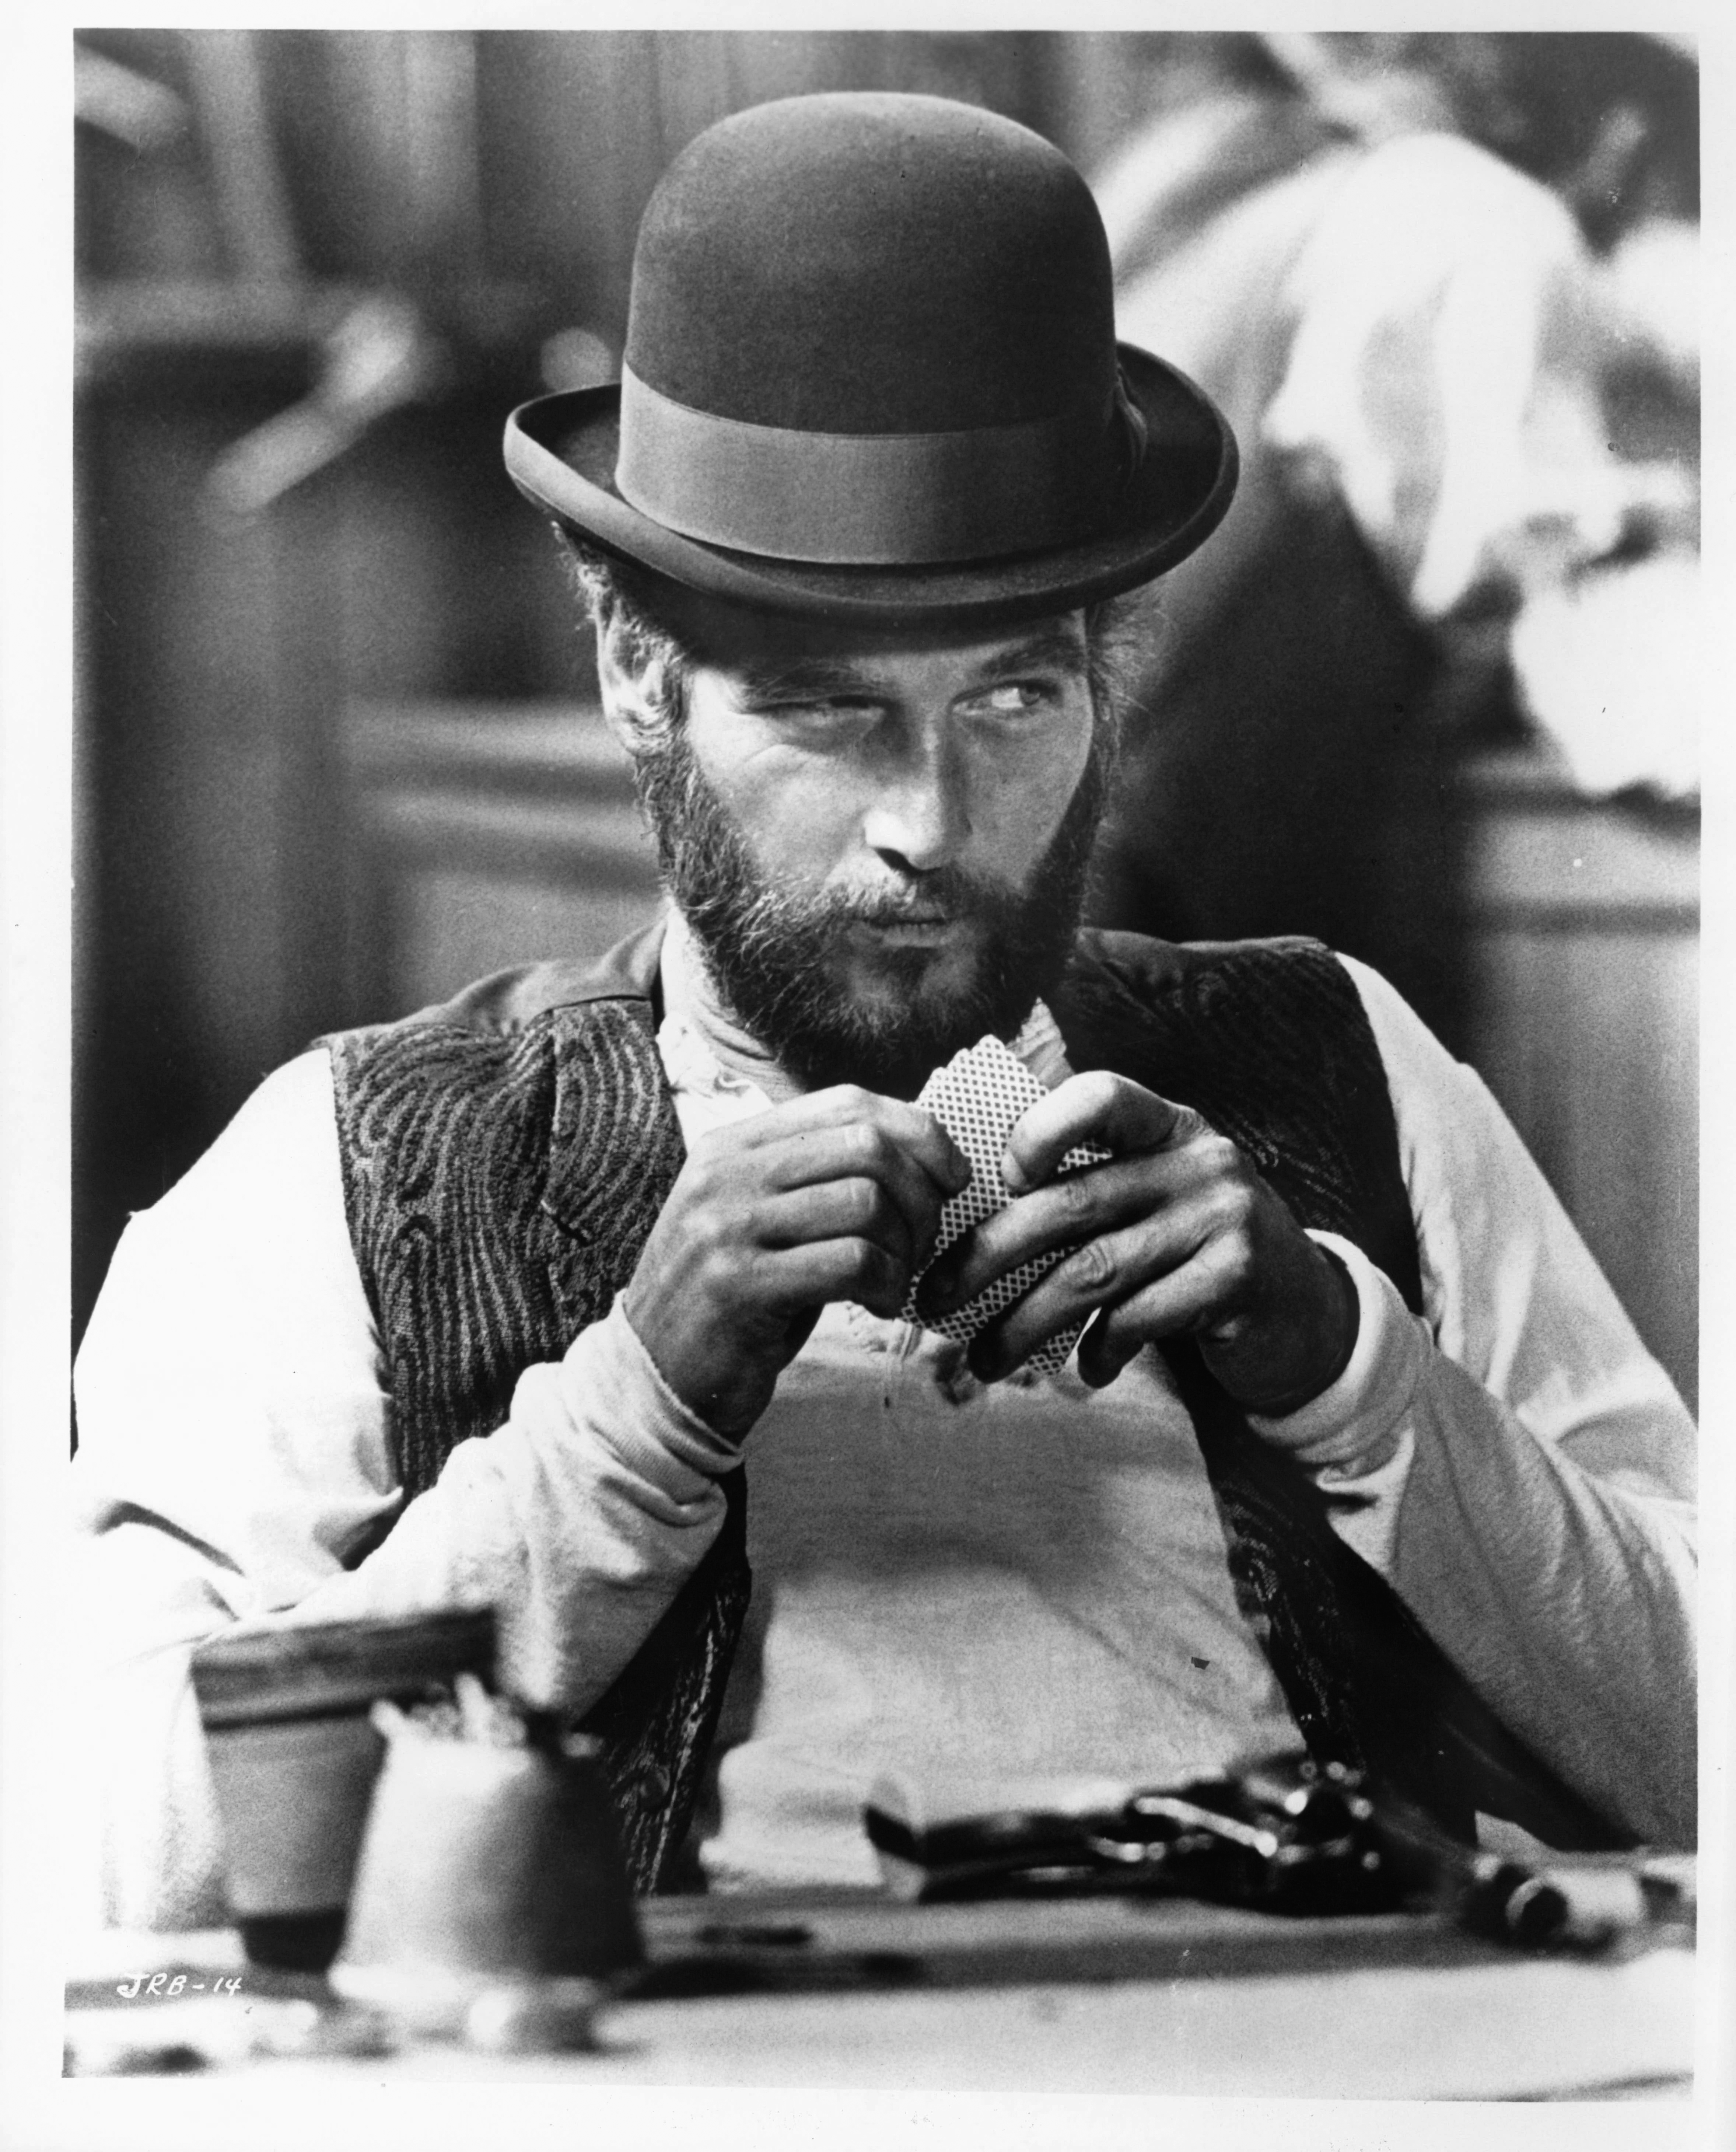 Still of Paul Newman in The Life and Times of Judge Roy Bean (1972)